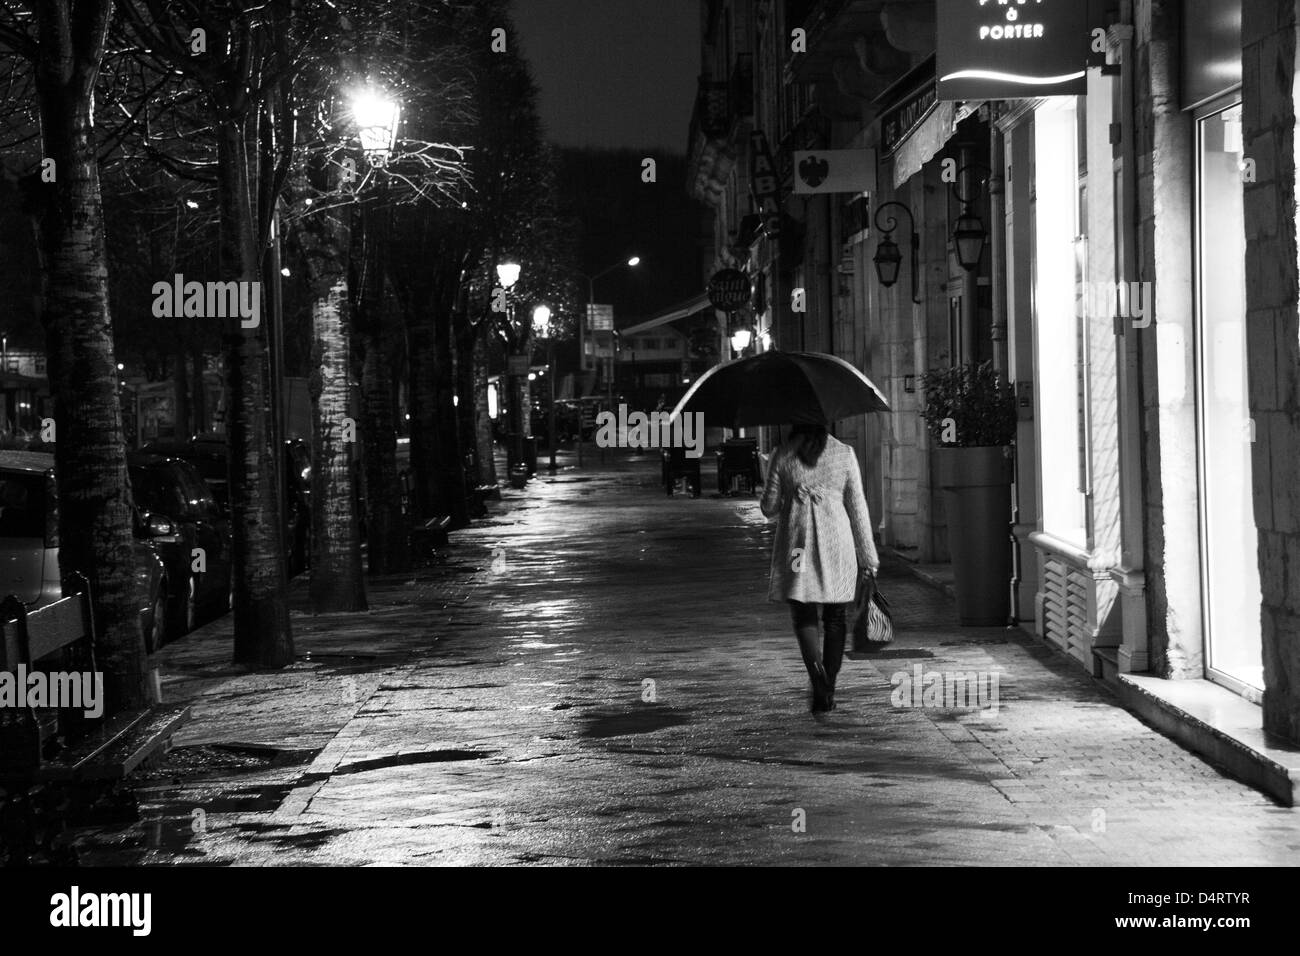 French woman walking in town at night Stock Photo